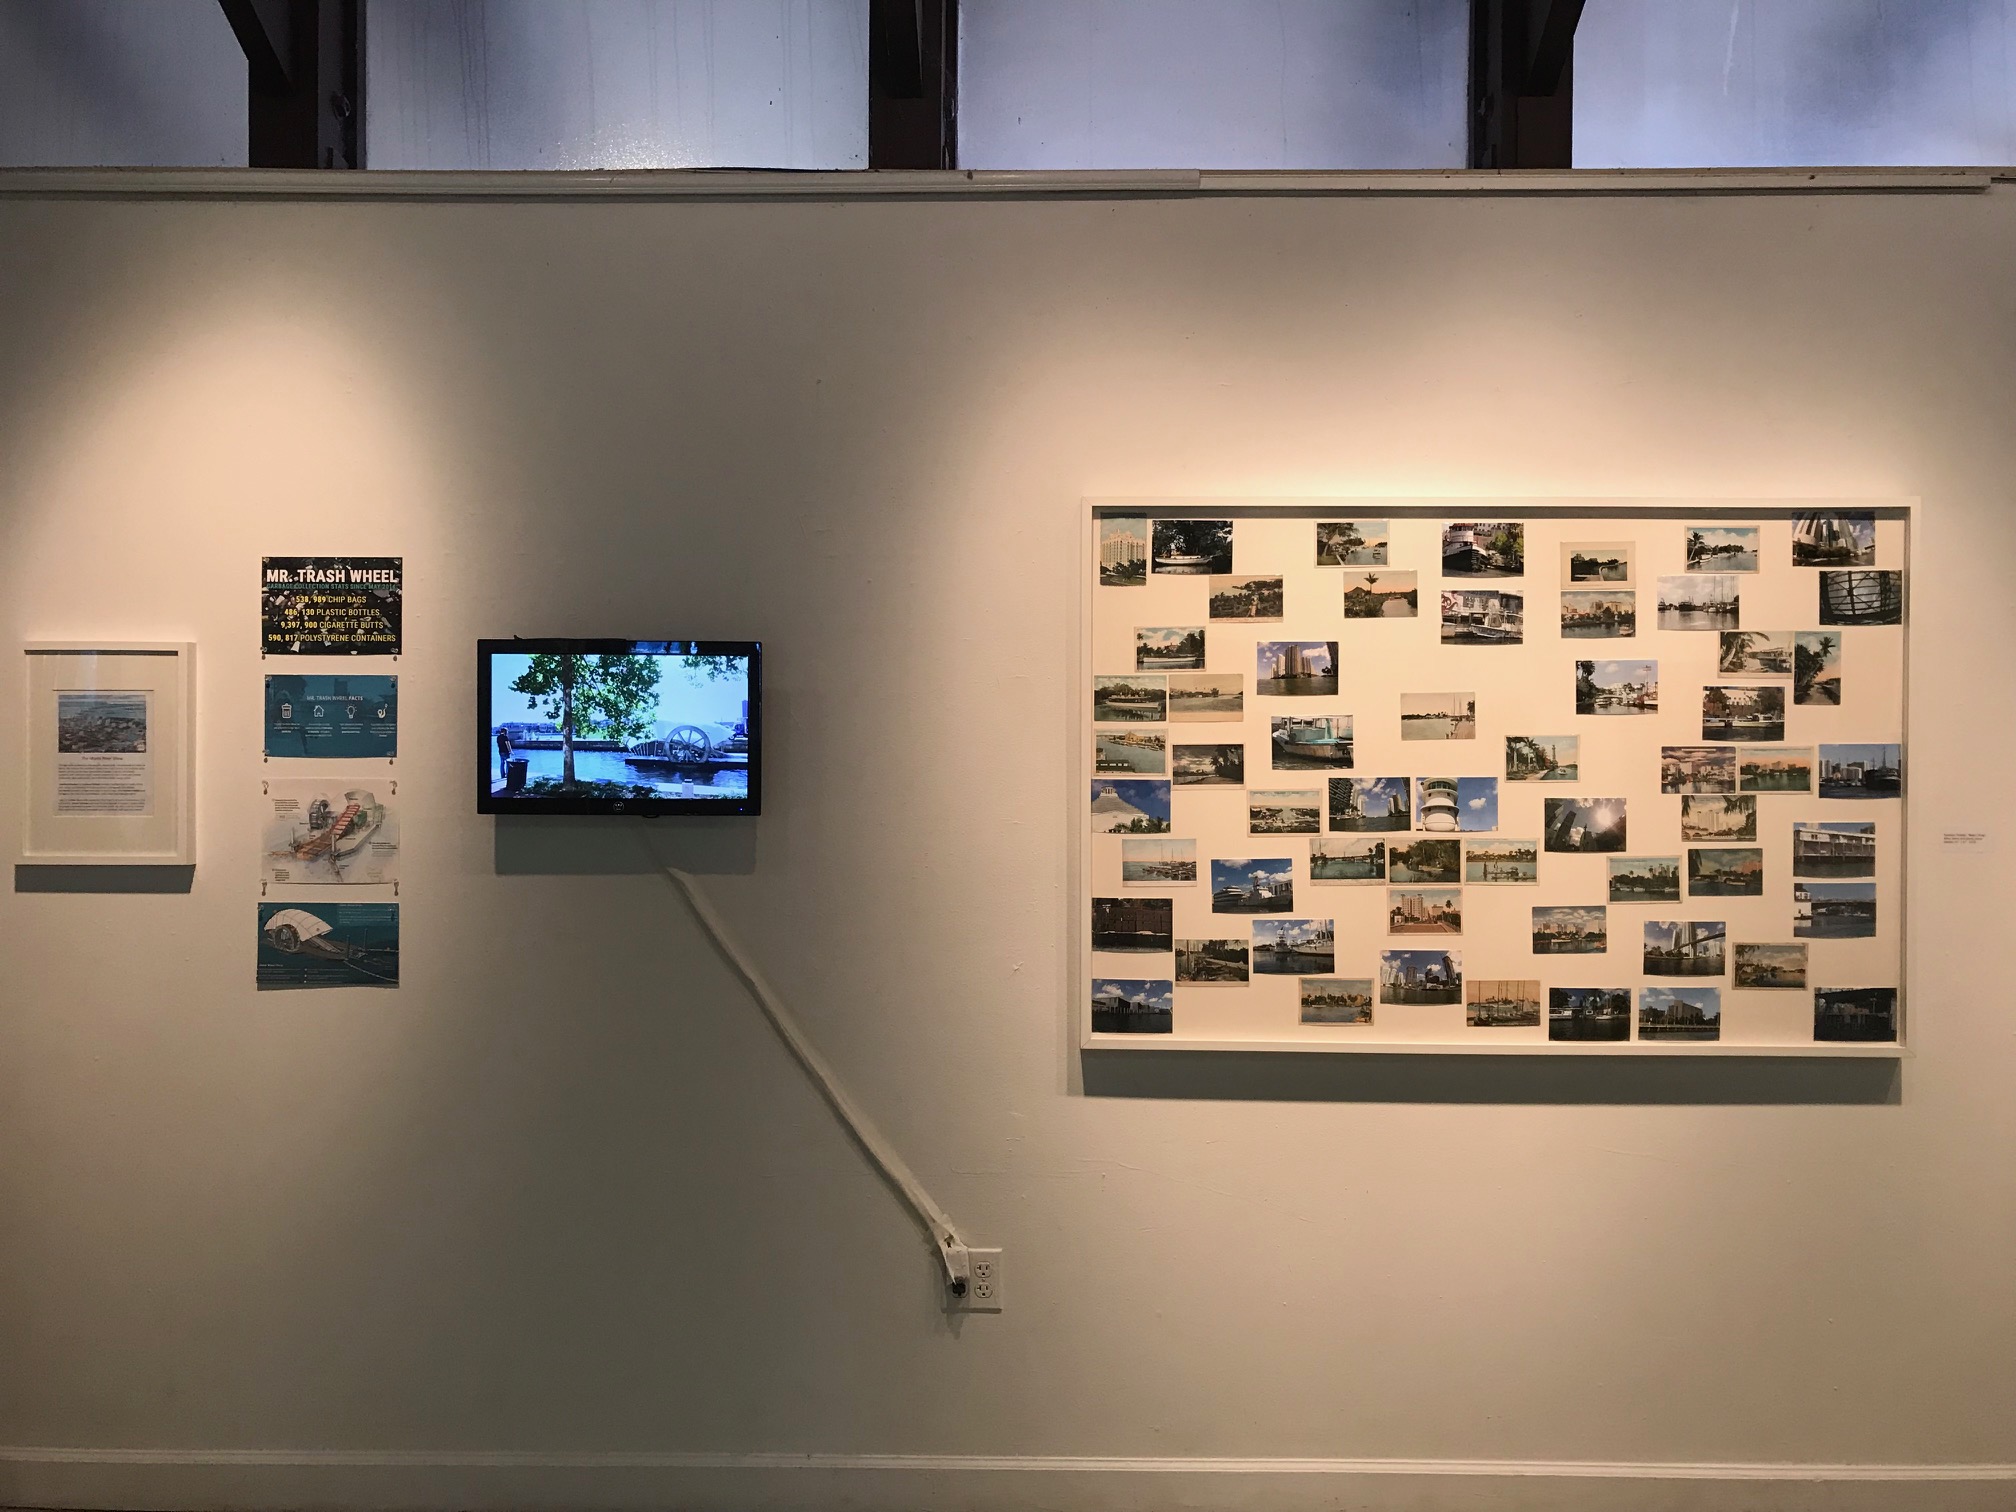   From left to right: Miami River Show , Gustavo Oviedo     "Mr.Trash Wheel"  Project  4 videos compilation  Gustavo Oviedo   “Miami River” , 2016  eBay items and photo prints (detail)  &nbsp;61” x 41 